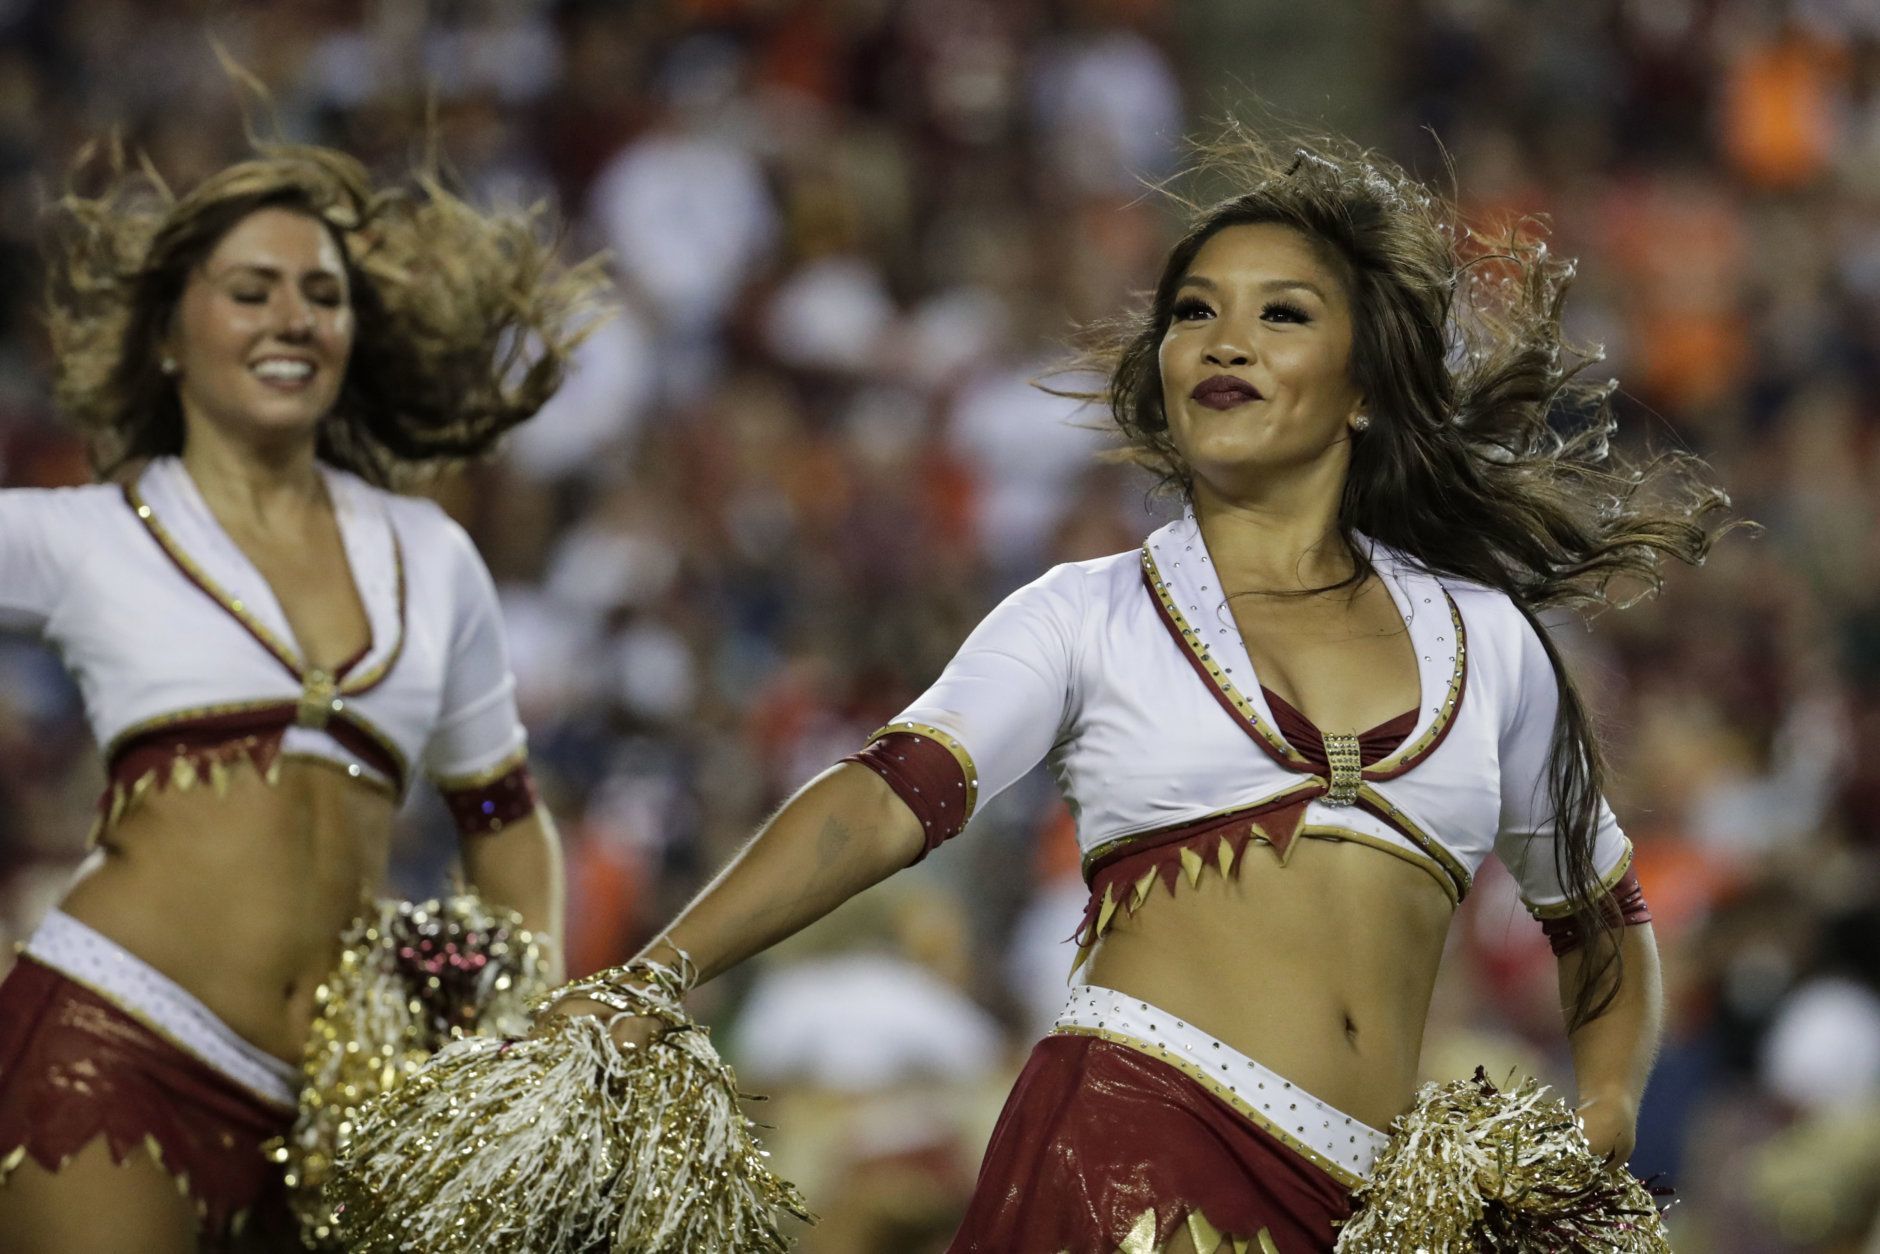 The Washington Redskins cheerleaders perform during the first half of an NFL football game between the Washington Redskins and the Chicago Bears, Monday, Sept. 23, 2019, in Landover, Md. (AP Photo/Julio Cortez)